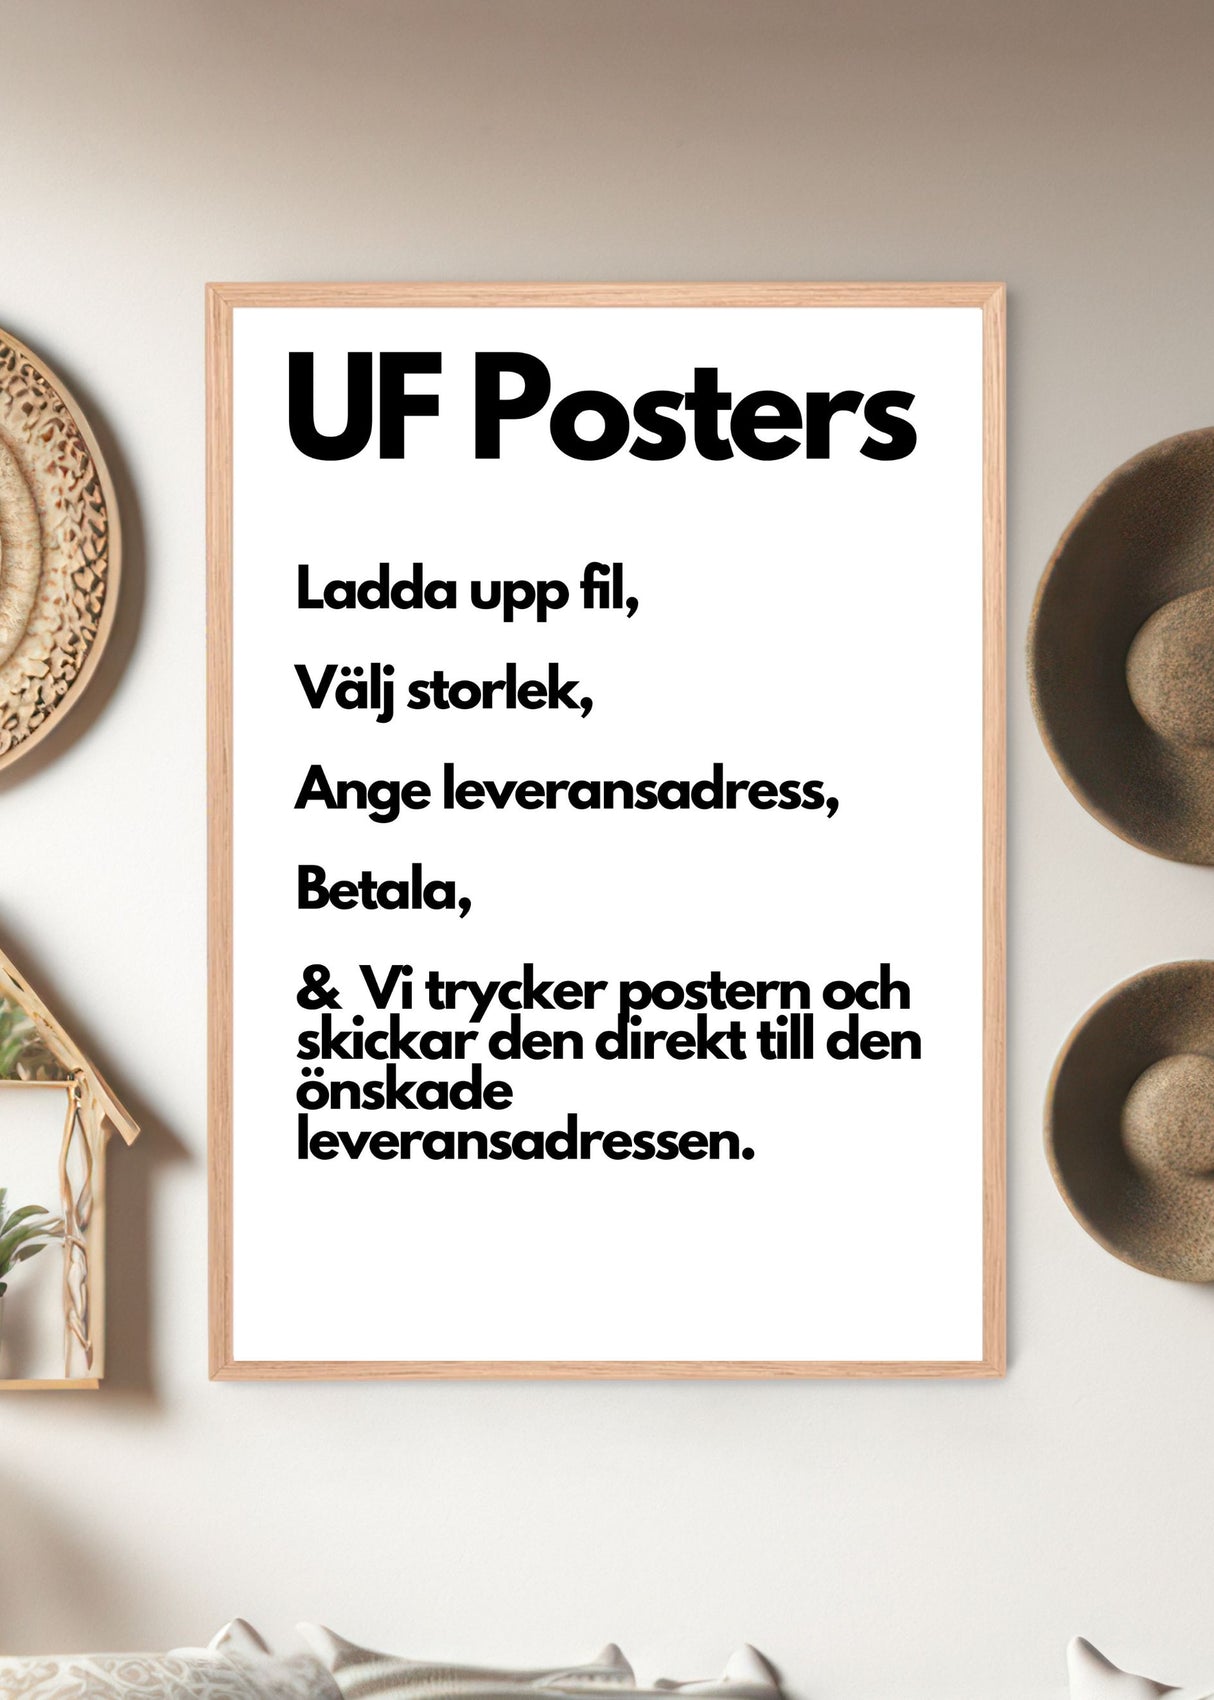 UF posters on demand